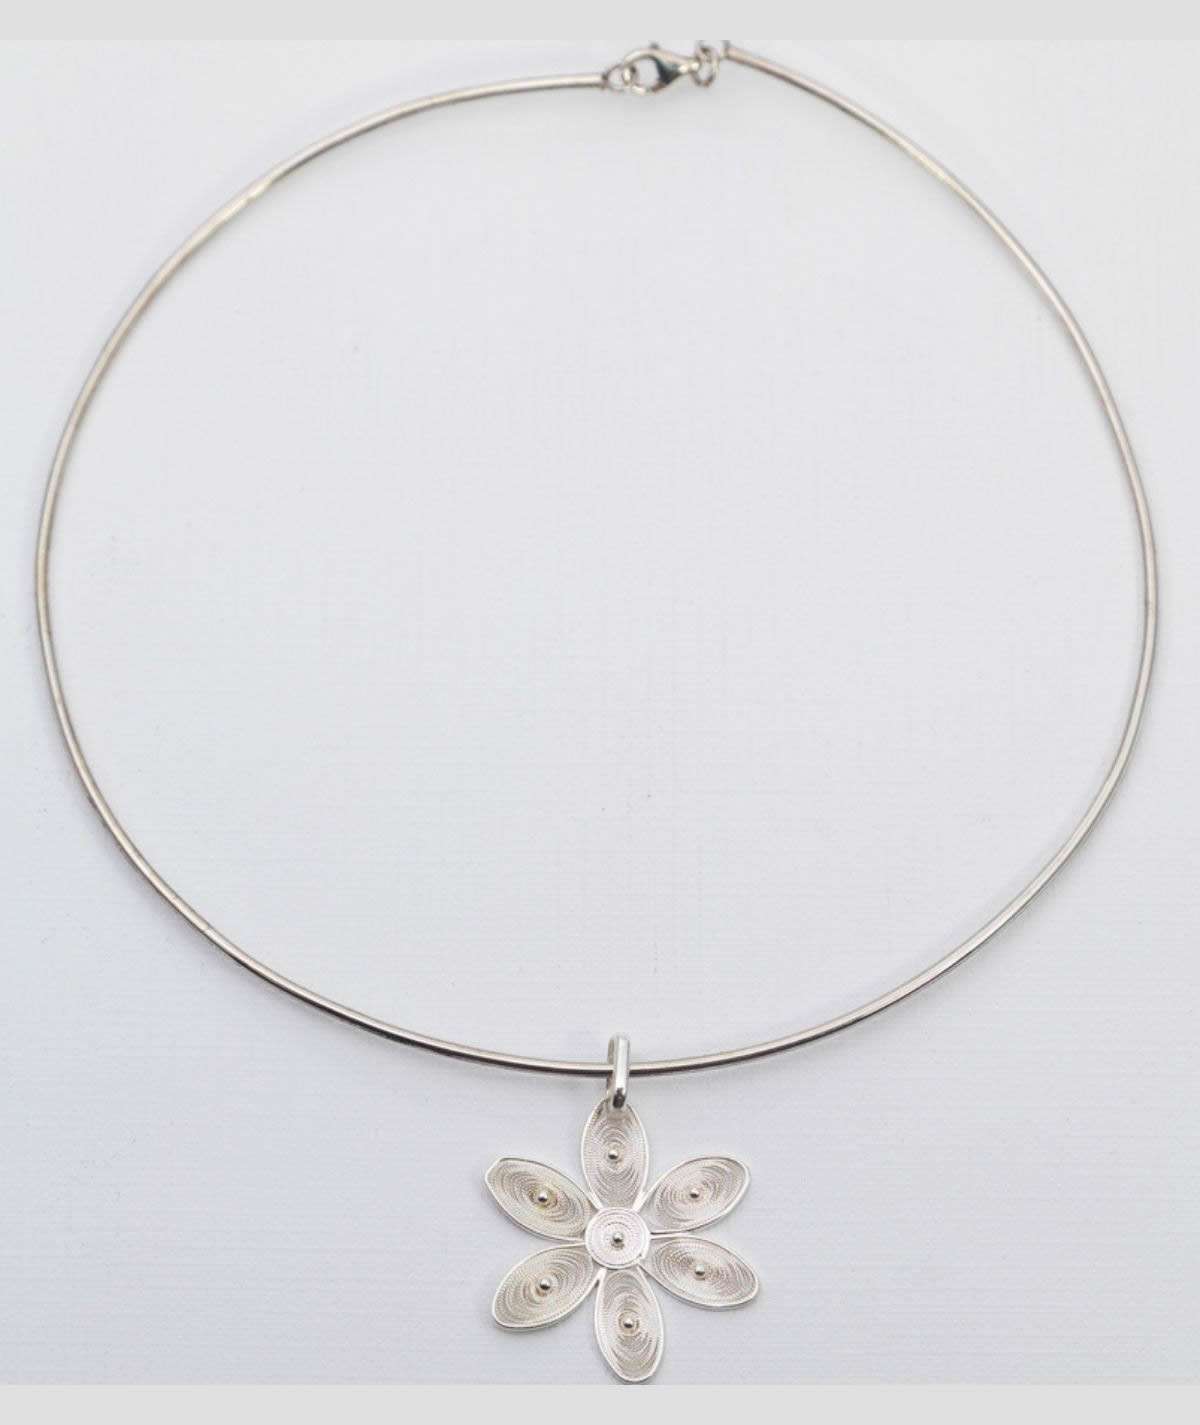 Silver Necklace with Flower Pendant made by ARTEMANOS